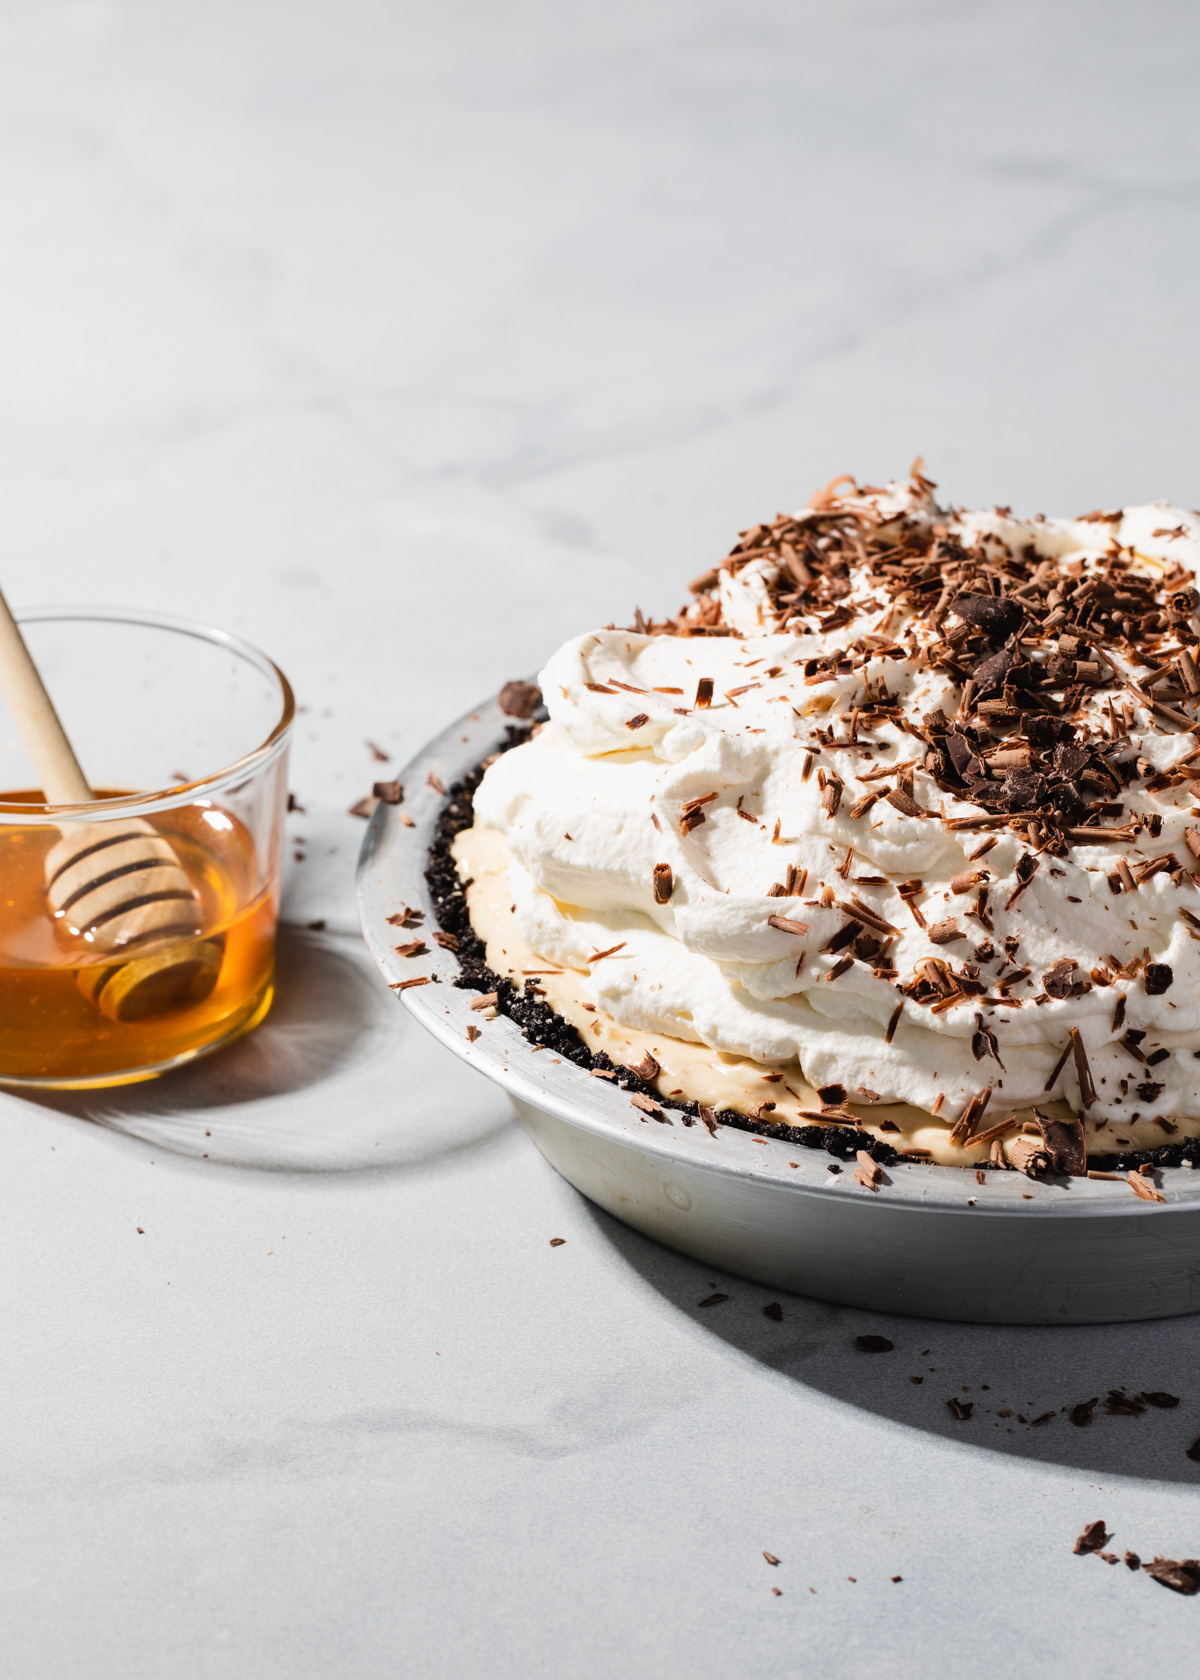 A no-bake peanut butter pie with salted honey whipped cream and chocolate shavings on top